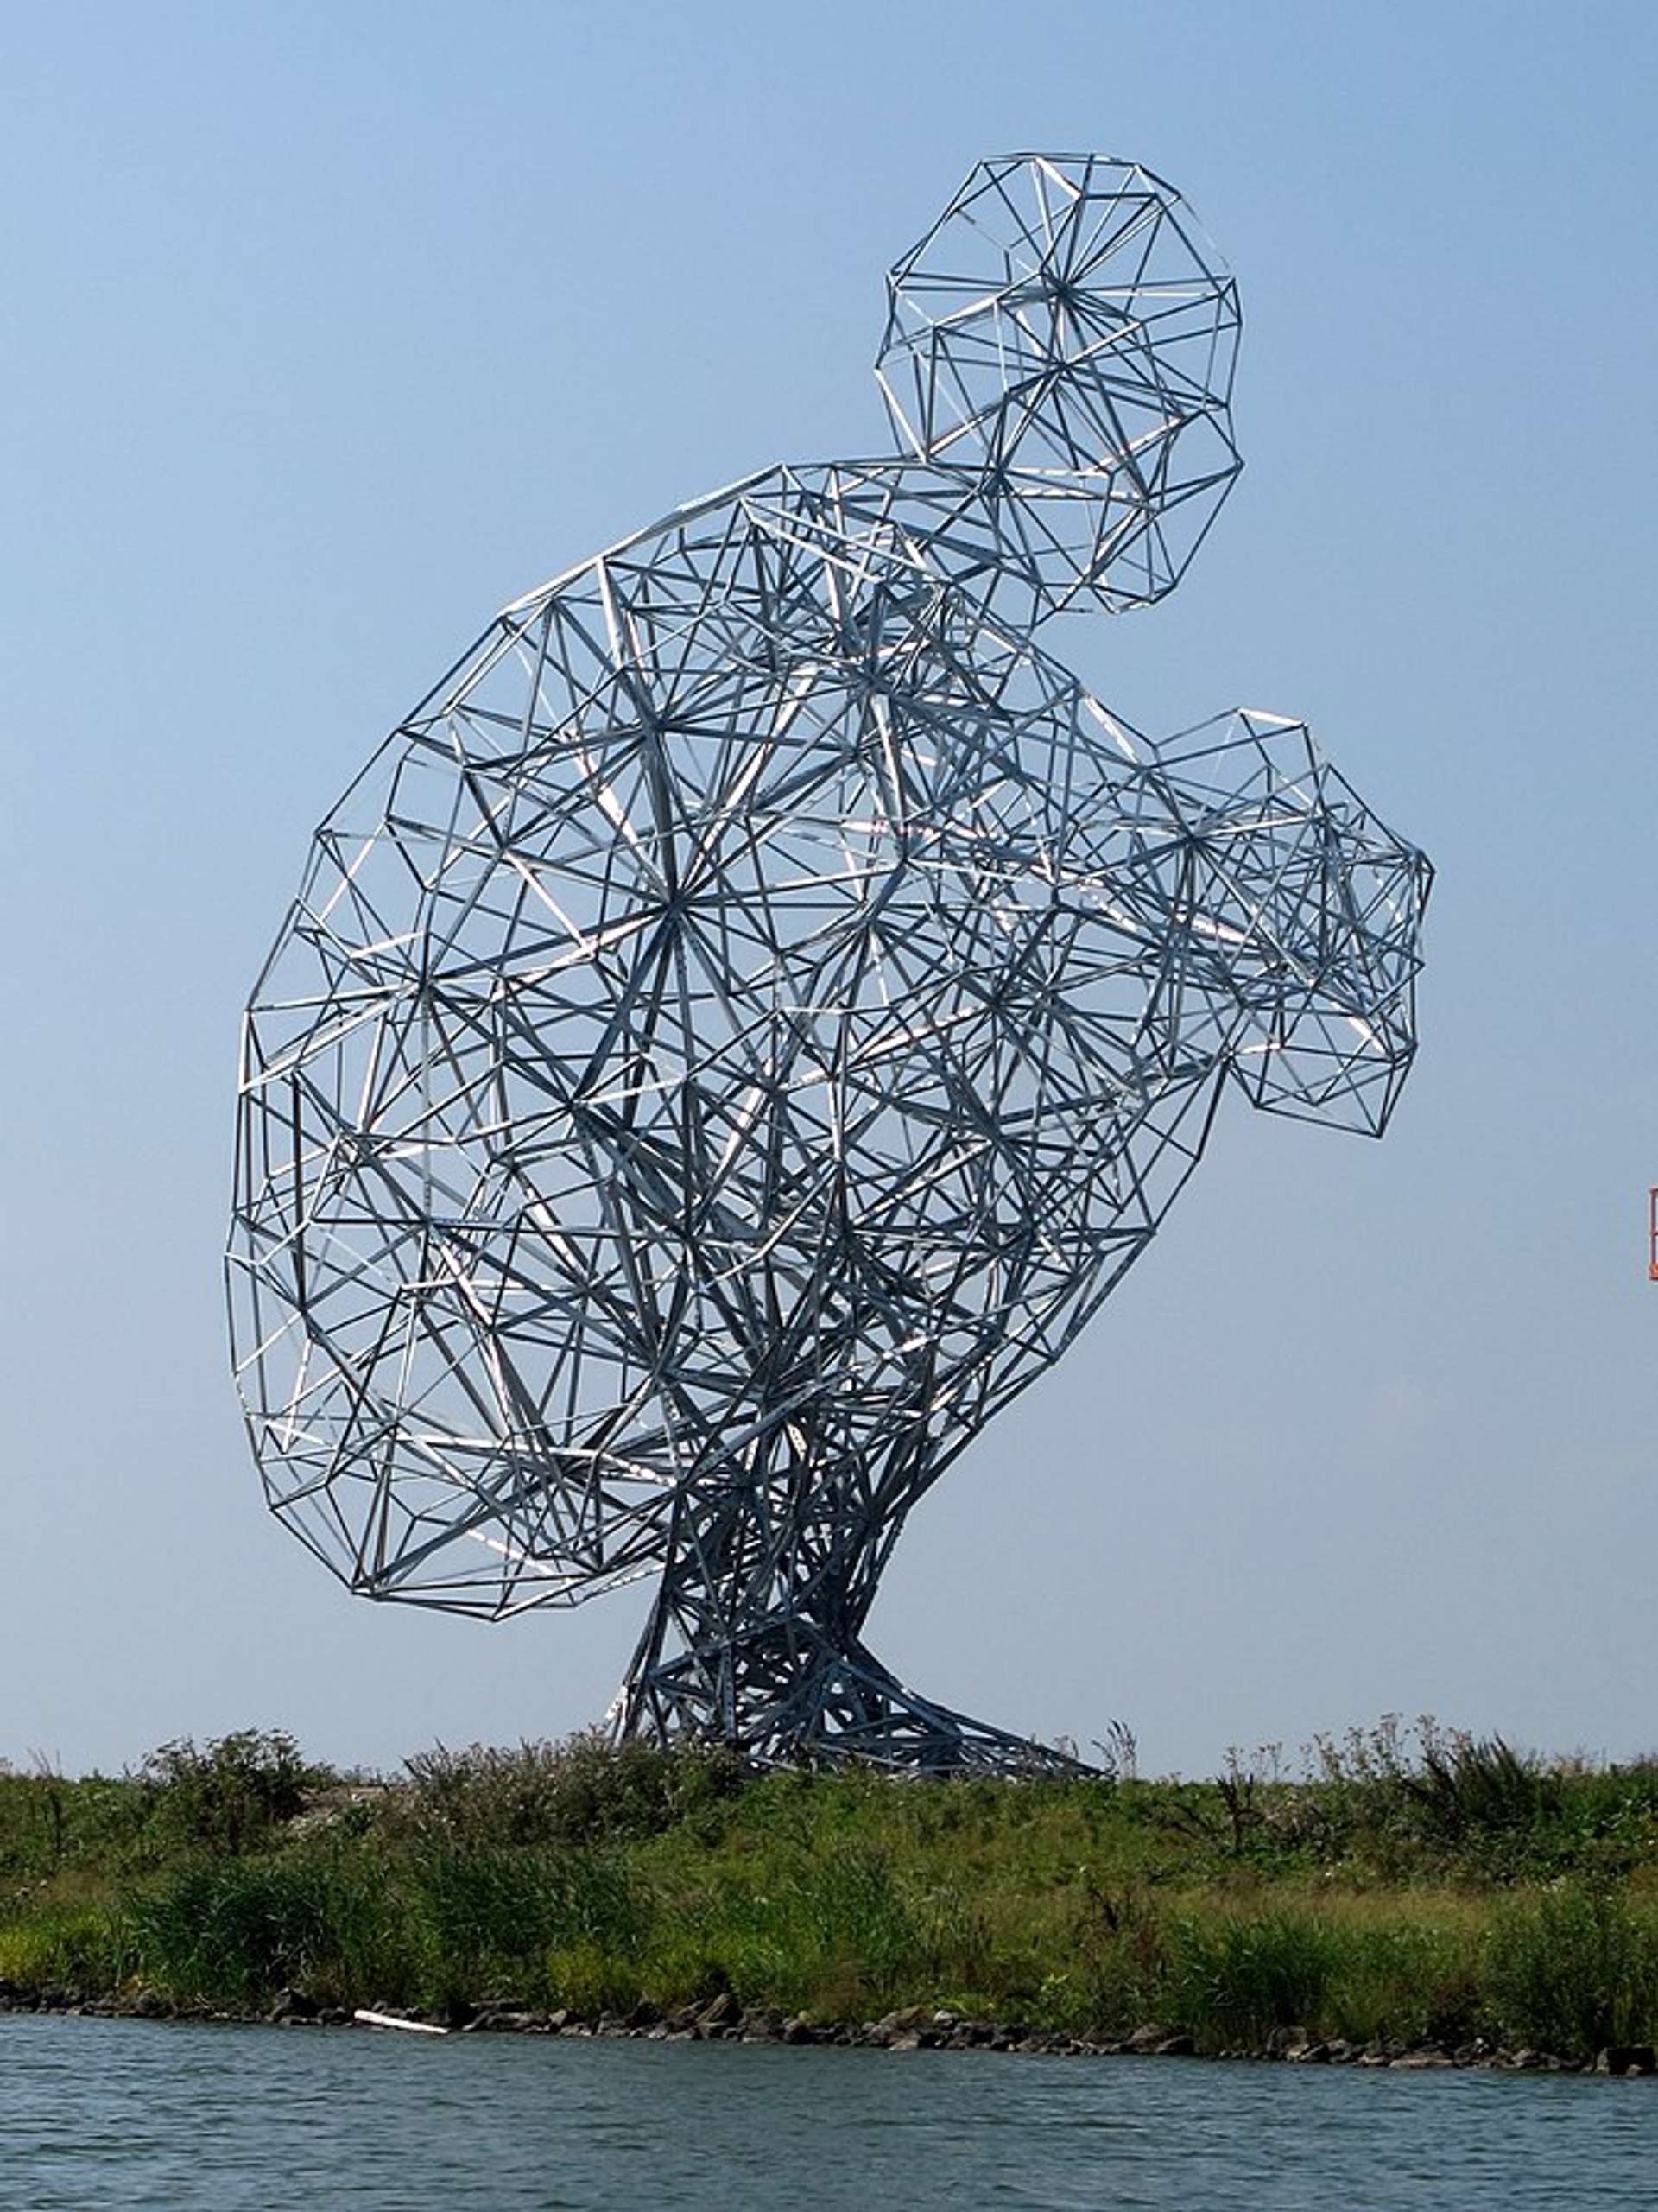 Anthony Gormley's 2010 sculpture, Exposure. A sculpture of a human figure, crouched and hugging its knees, constructed using stainless steel struts. 